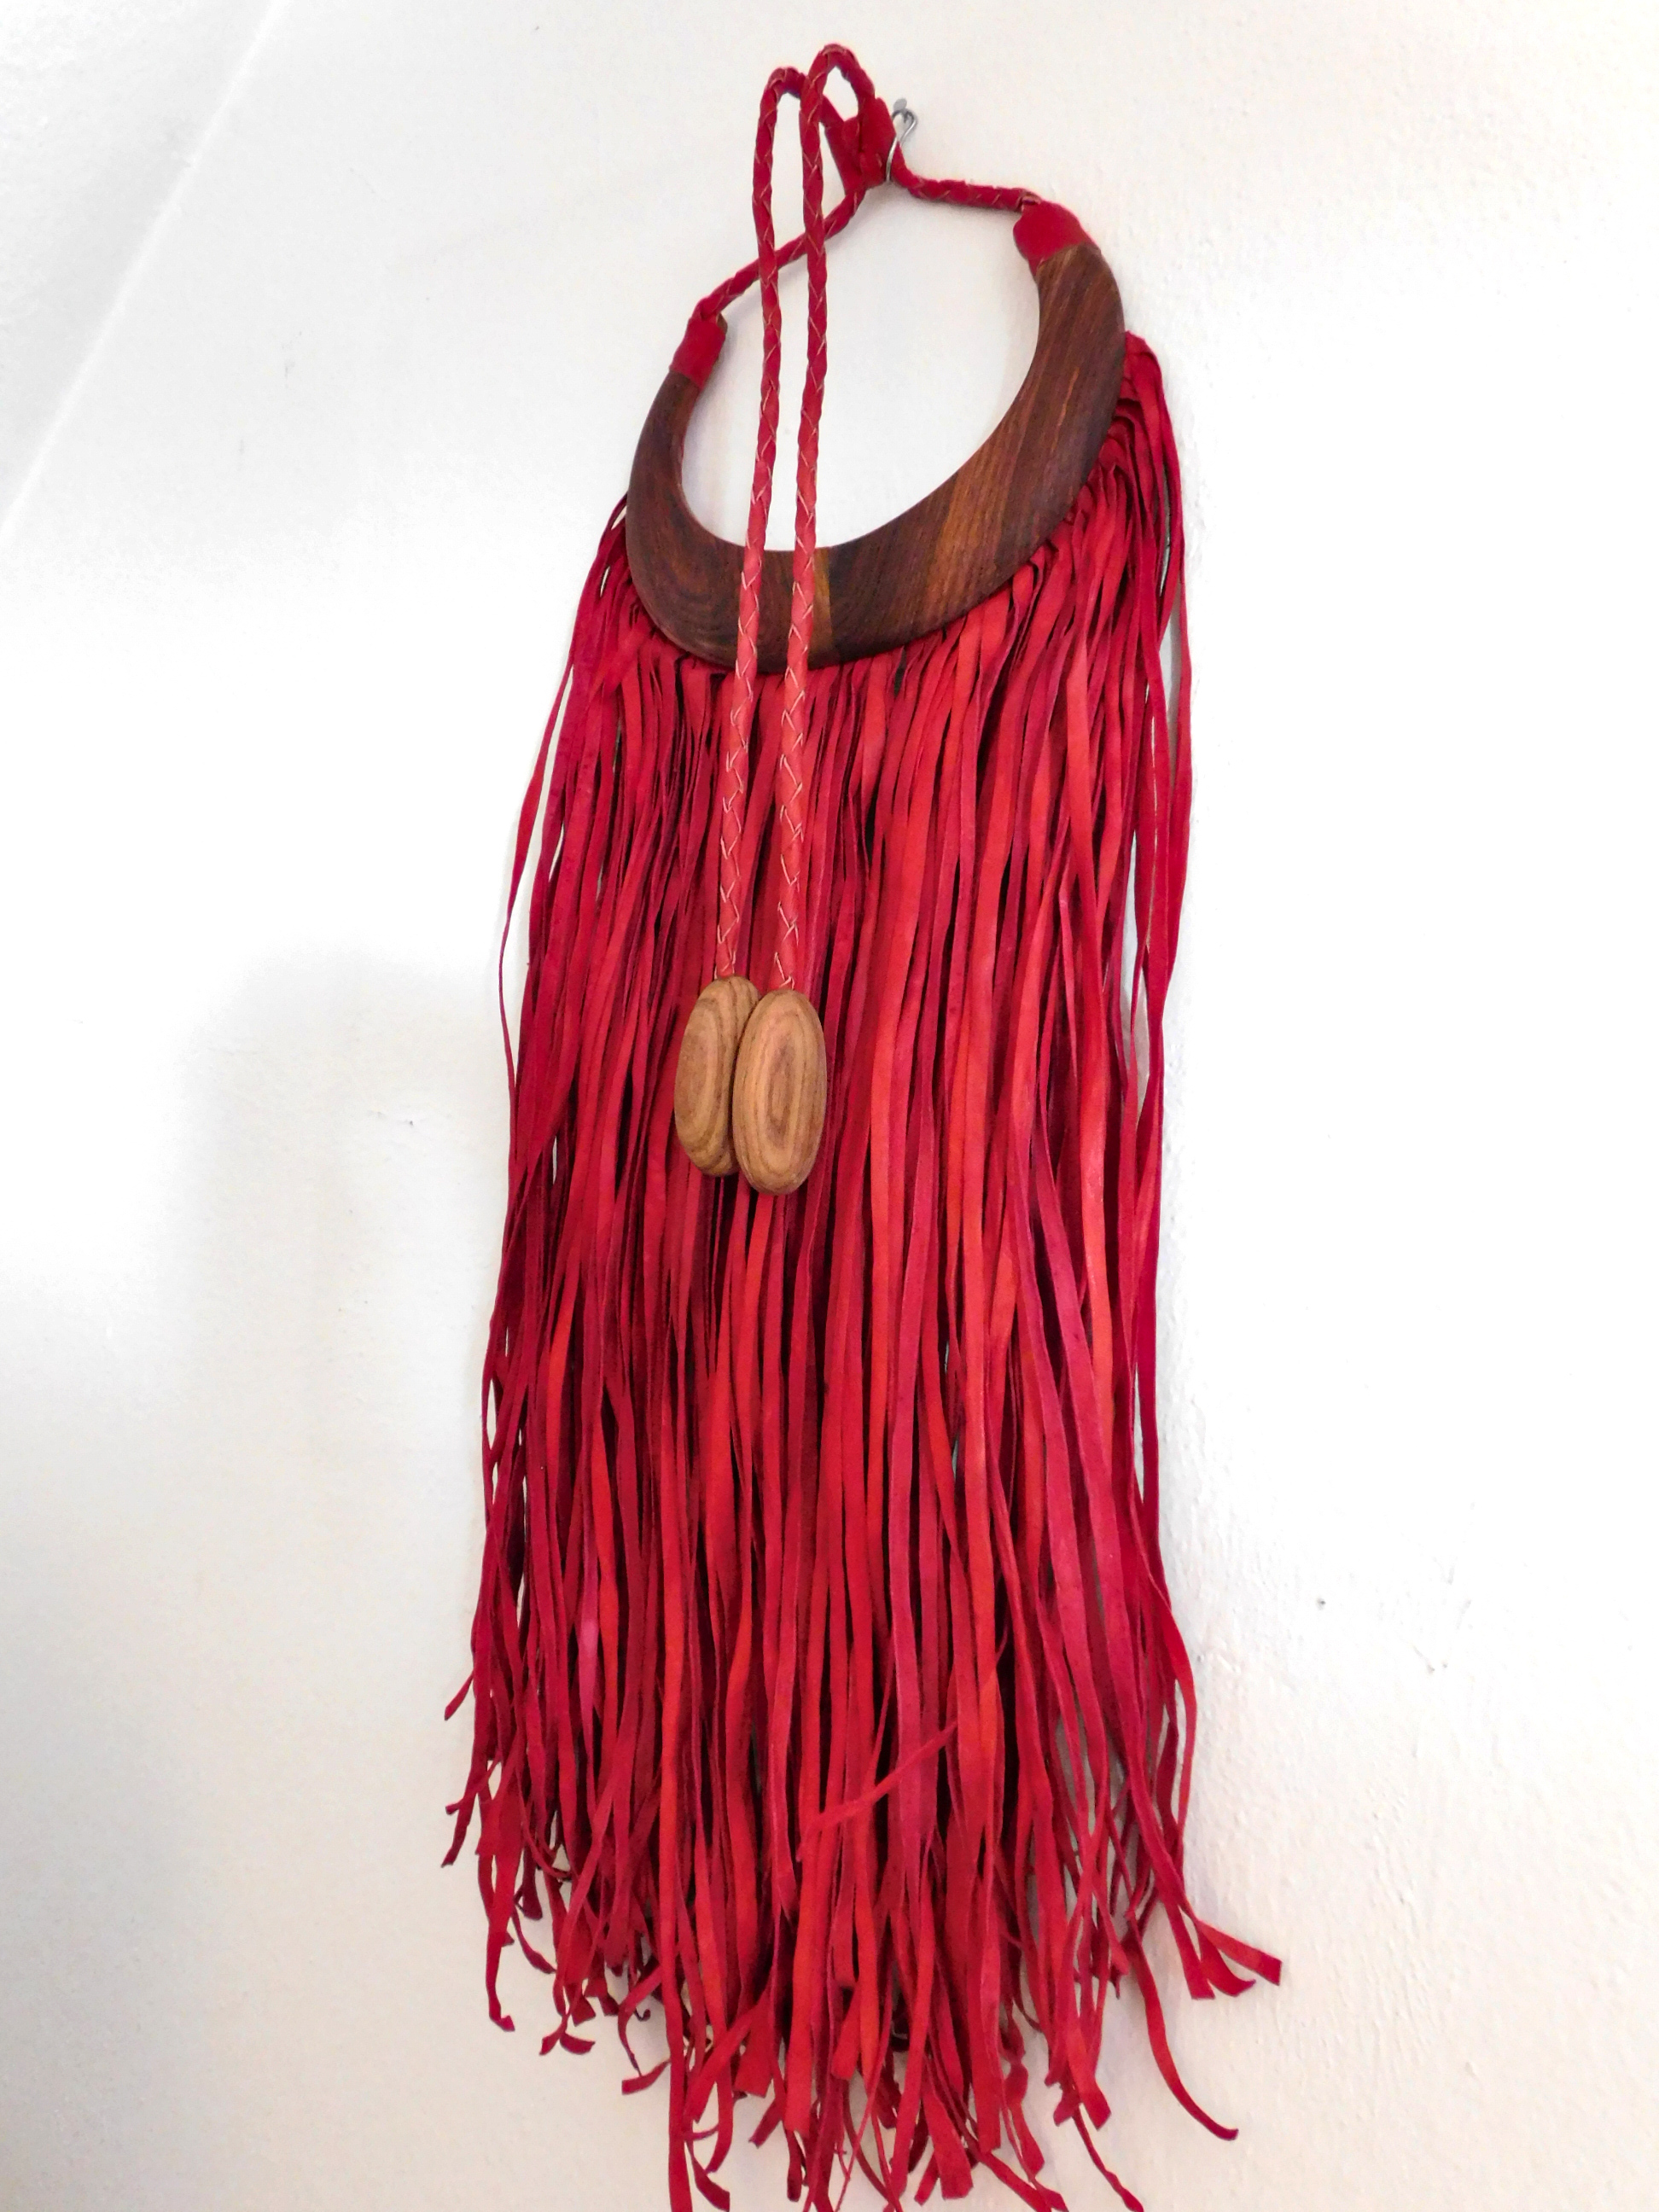 African decoration statement piece made of red leather fringes and wood